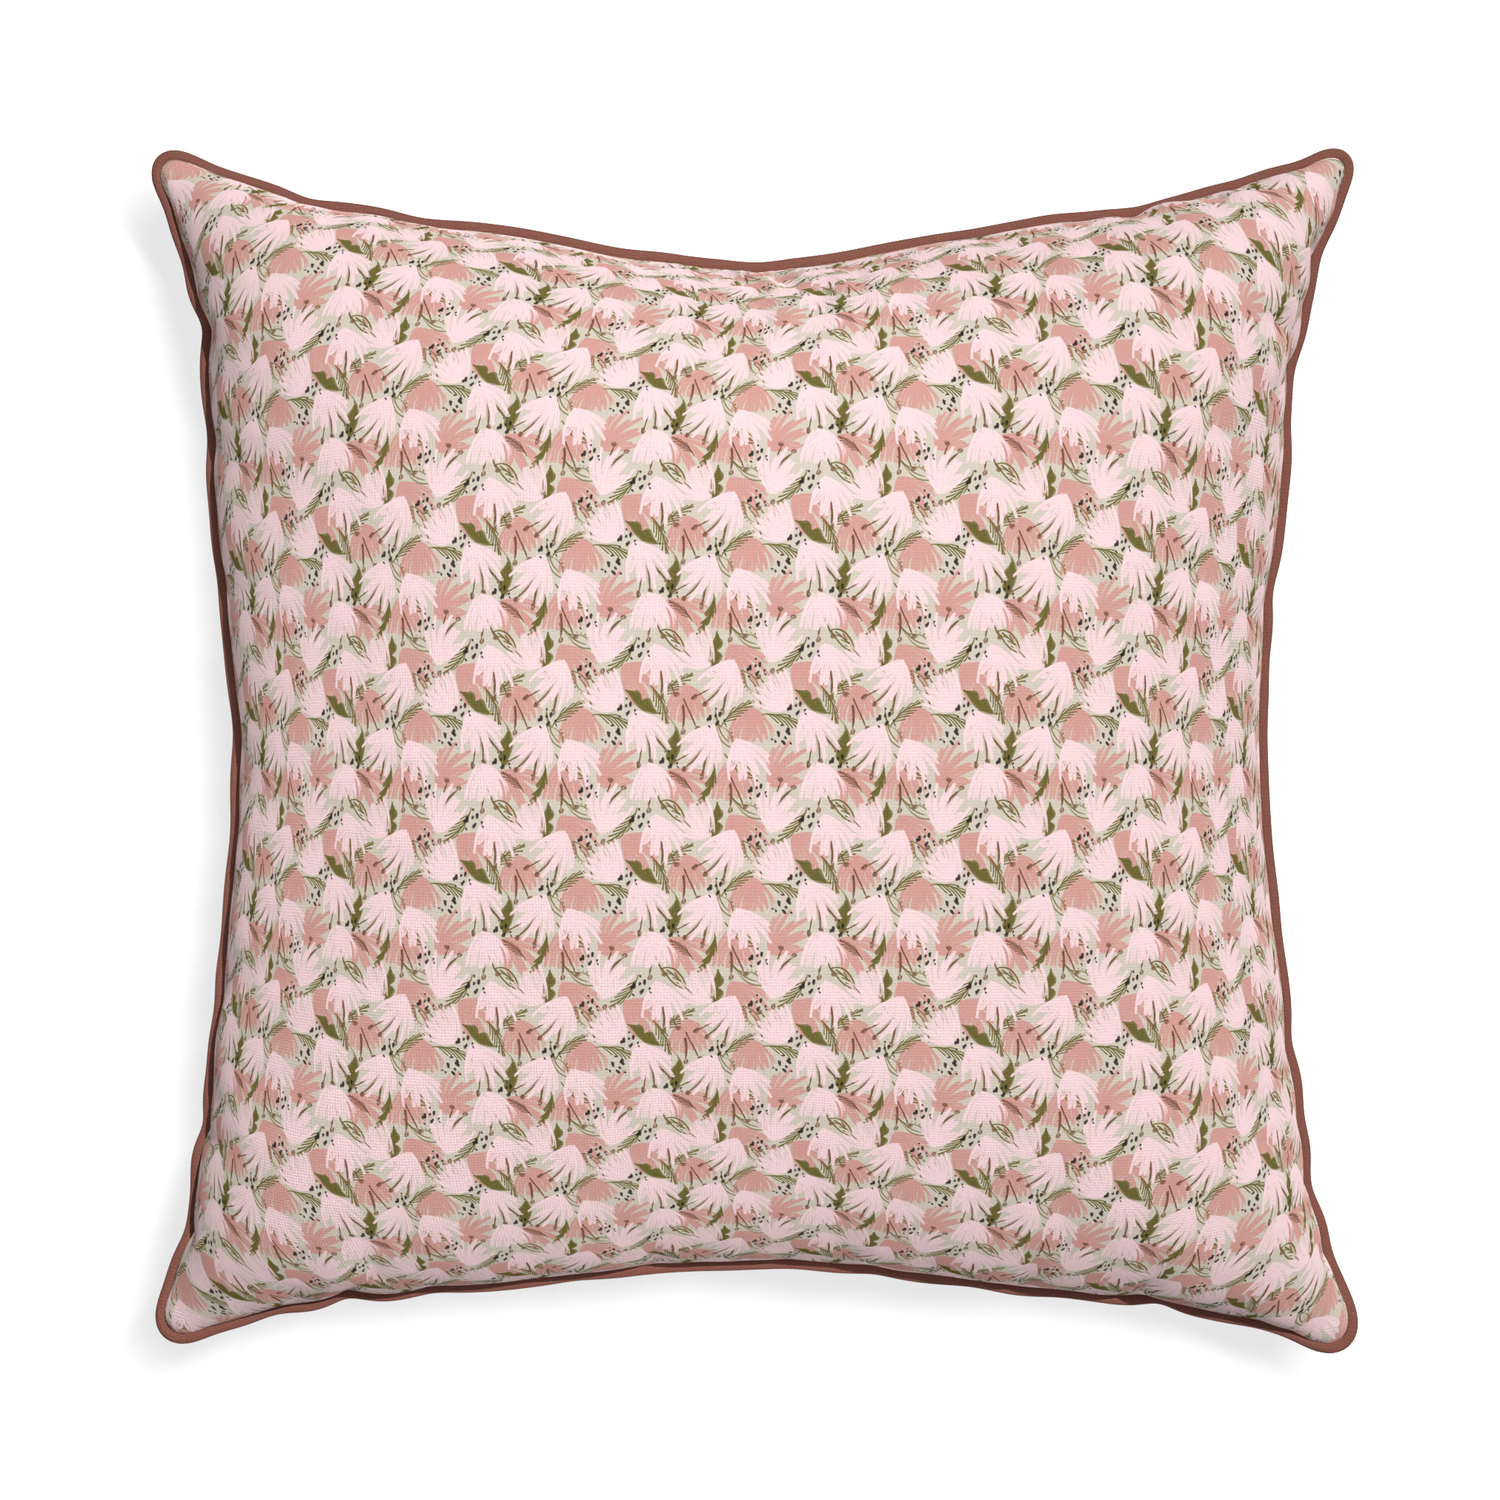 Euro-sham eden pink custom pink floralpillow with w piping on white background